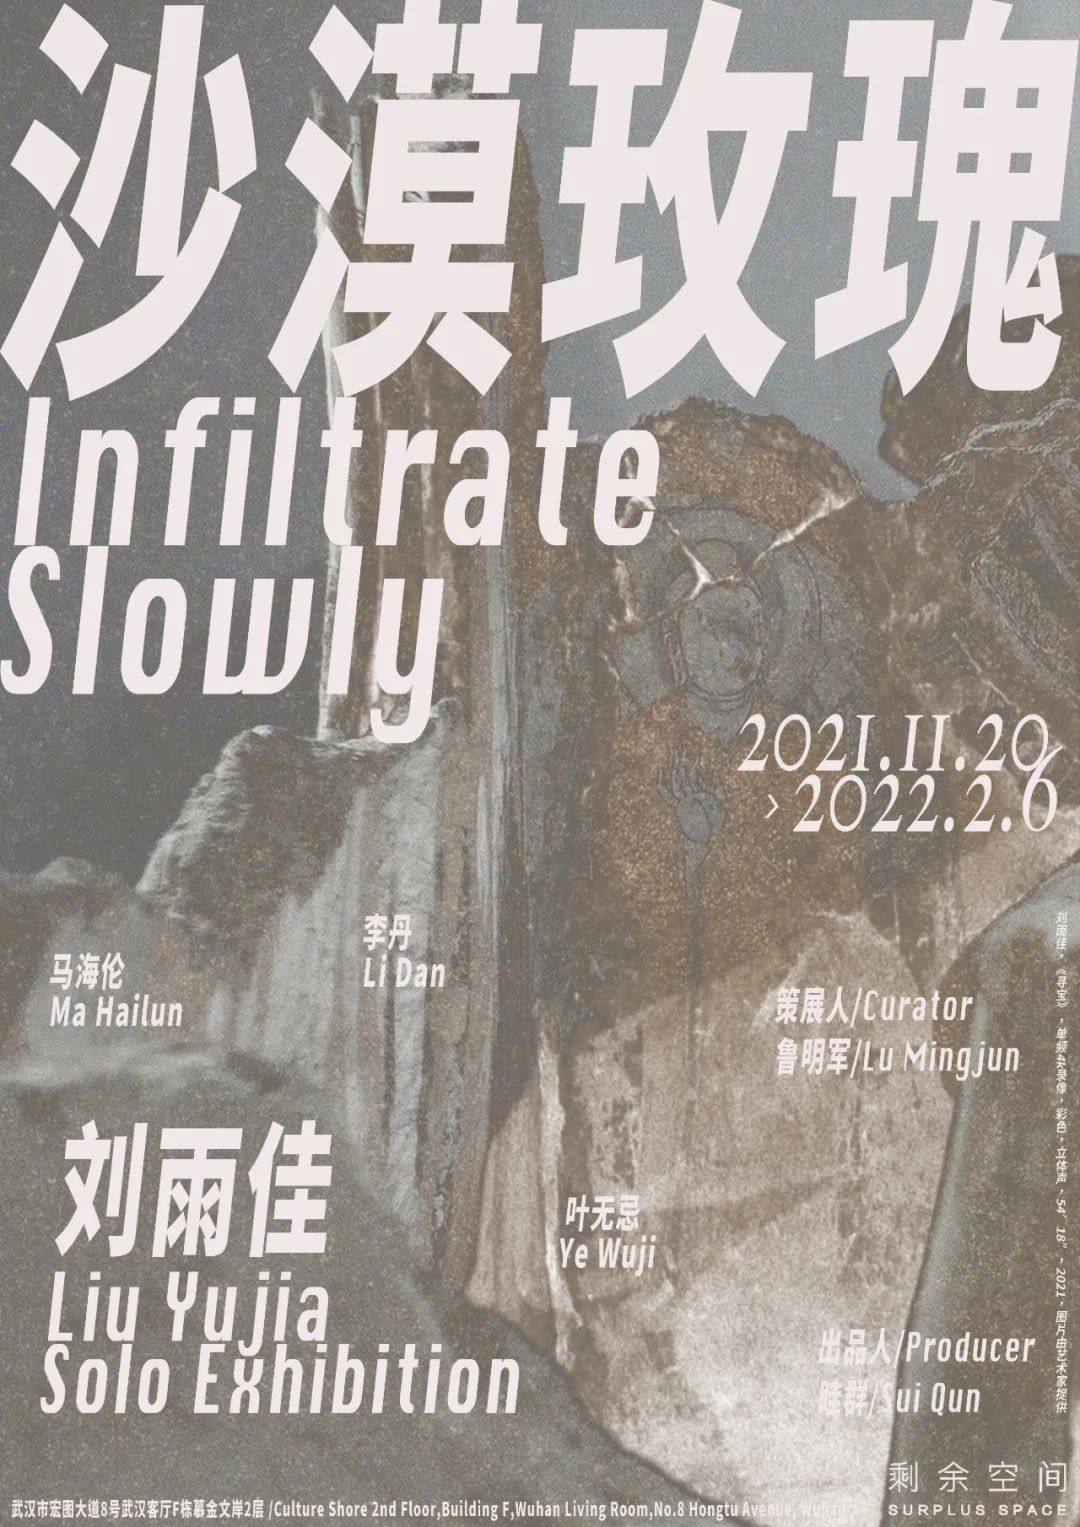 MA Hailun participates in the latest group exhibition at Surplus Space, curated by LU Mingjun